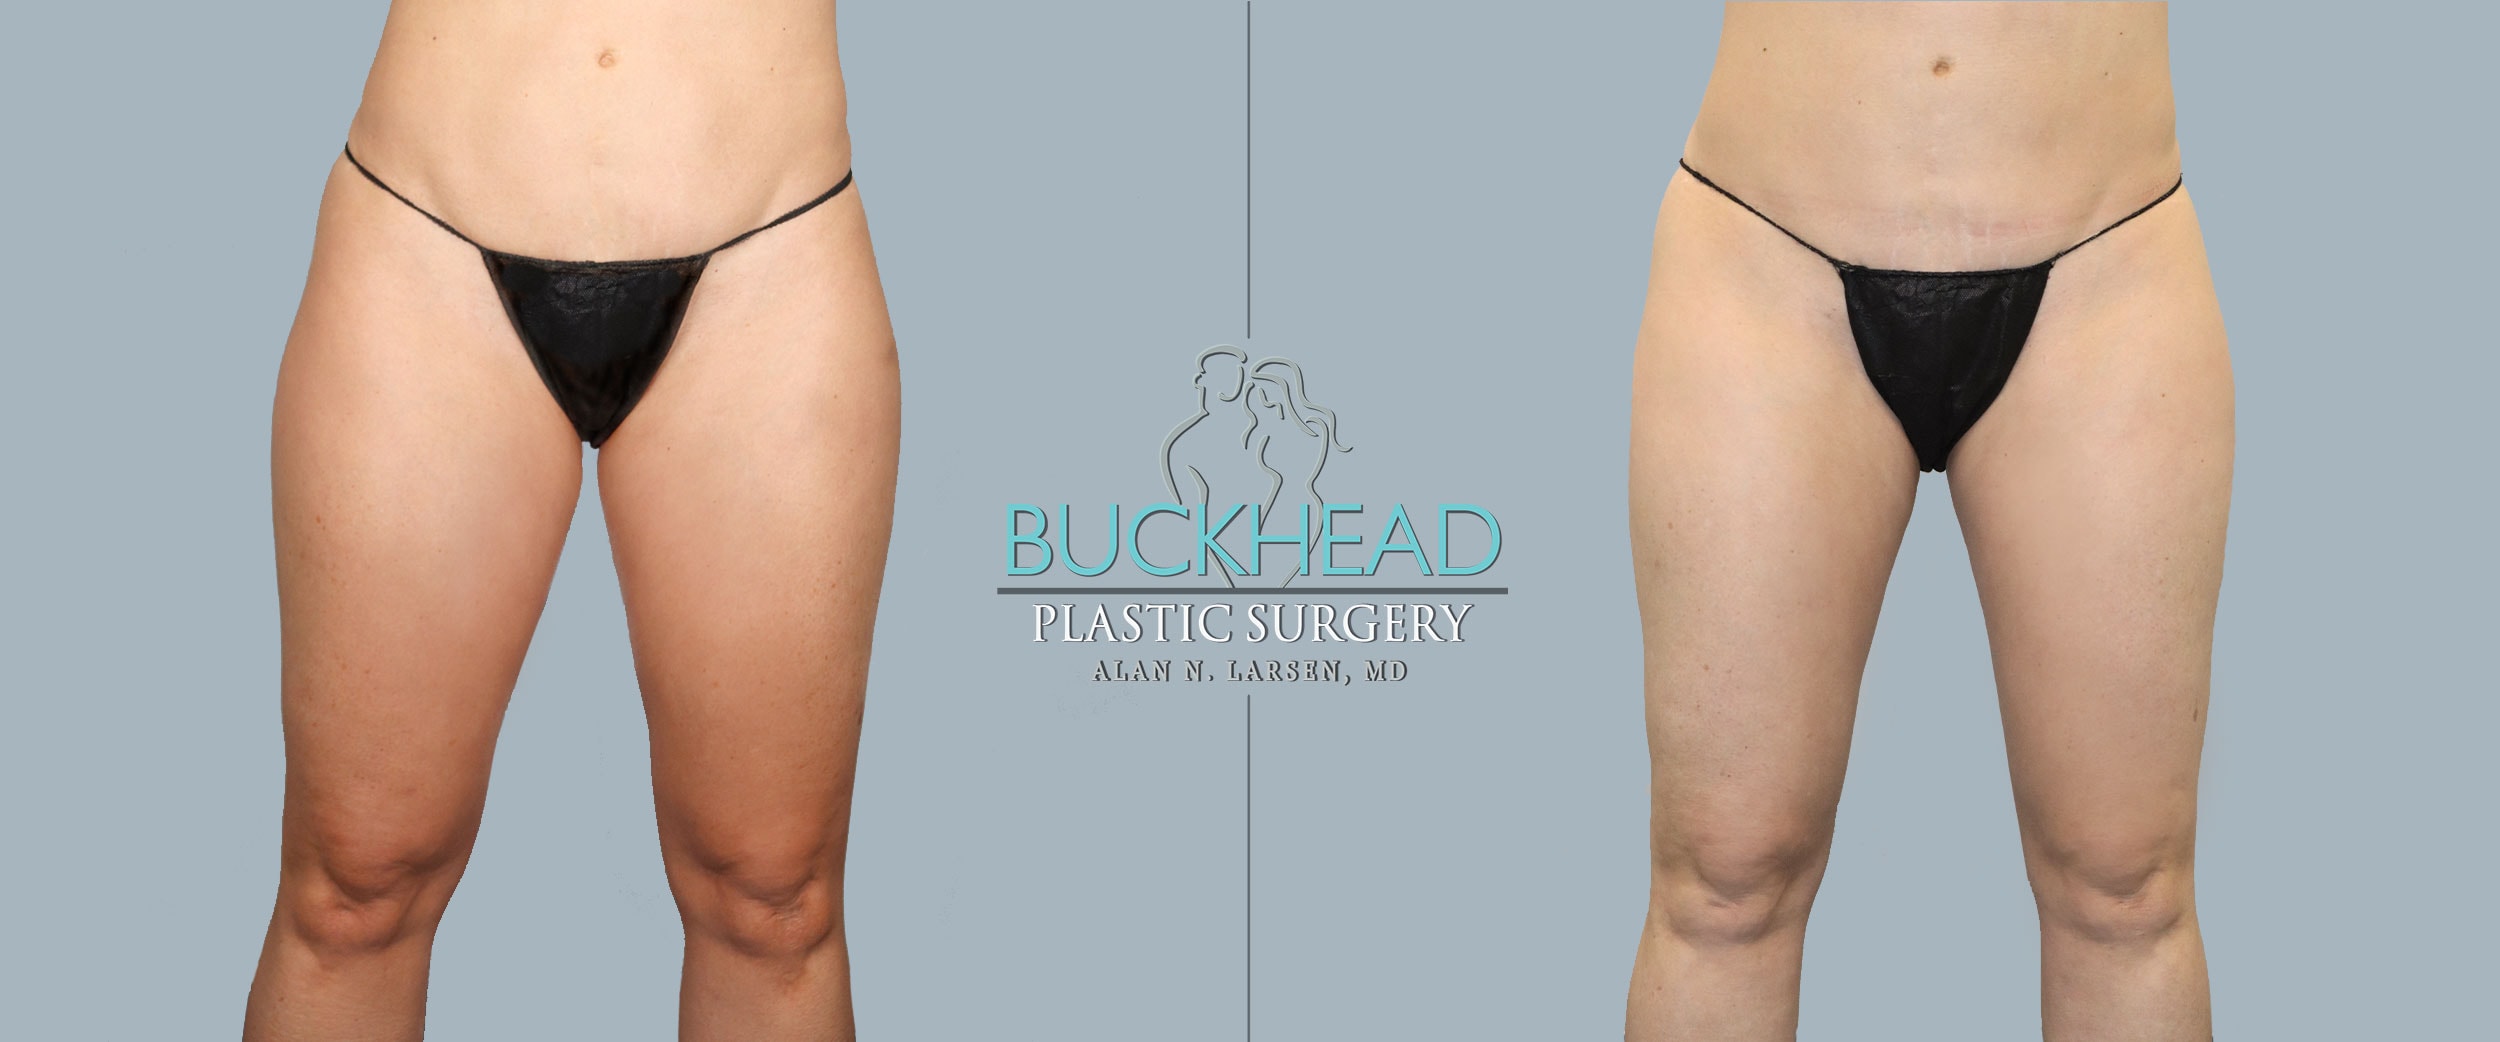 Before-and-After-Photo-Gallery-liposuction-Buckhead-Plastic-Surgery-Alan-N.-Larsen,-MD-Board-Certified-Plastic-Surgeon-Atlanta-GA-Inner-Thighs-Front